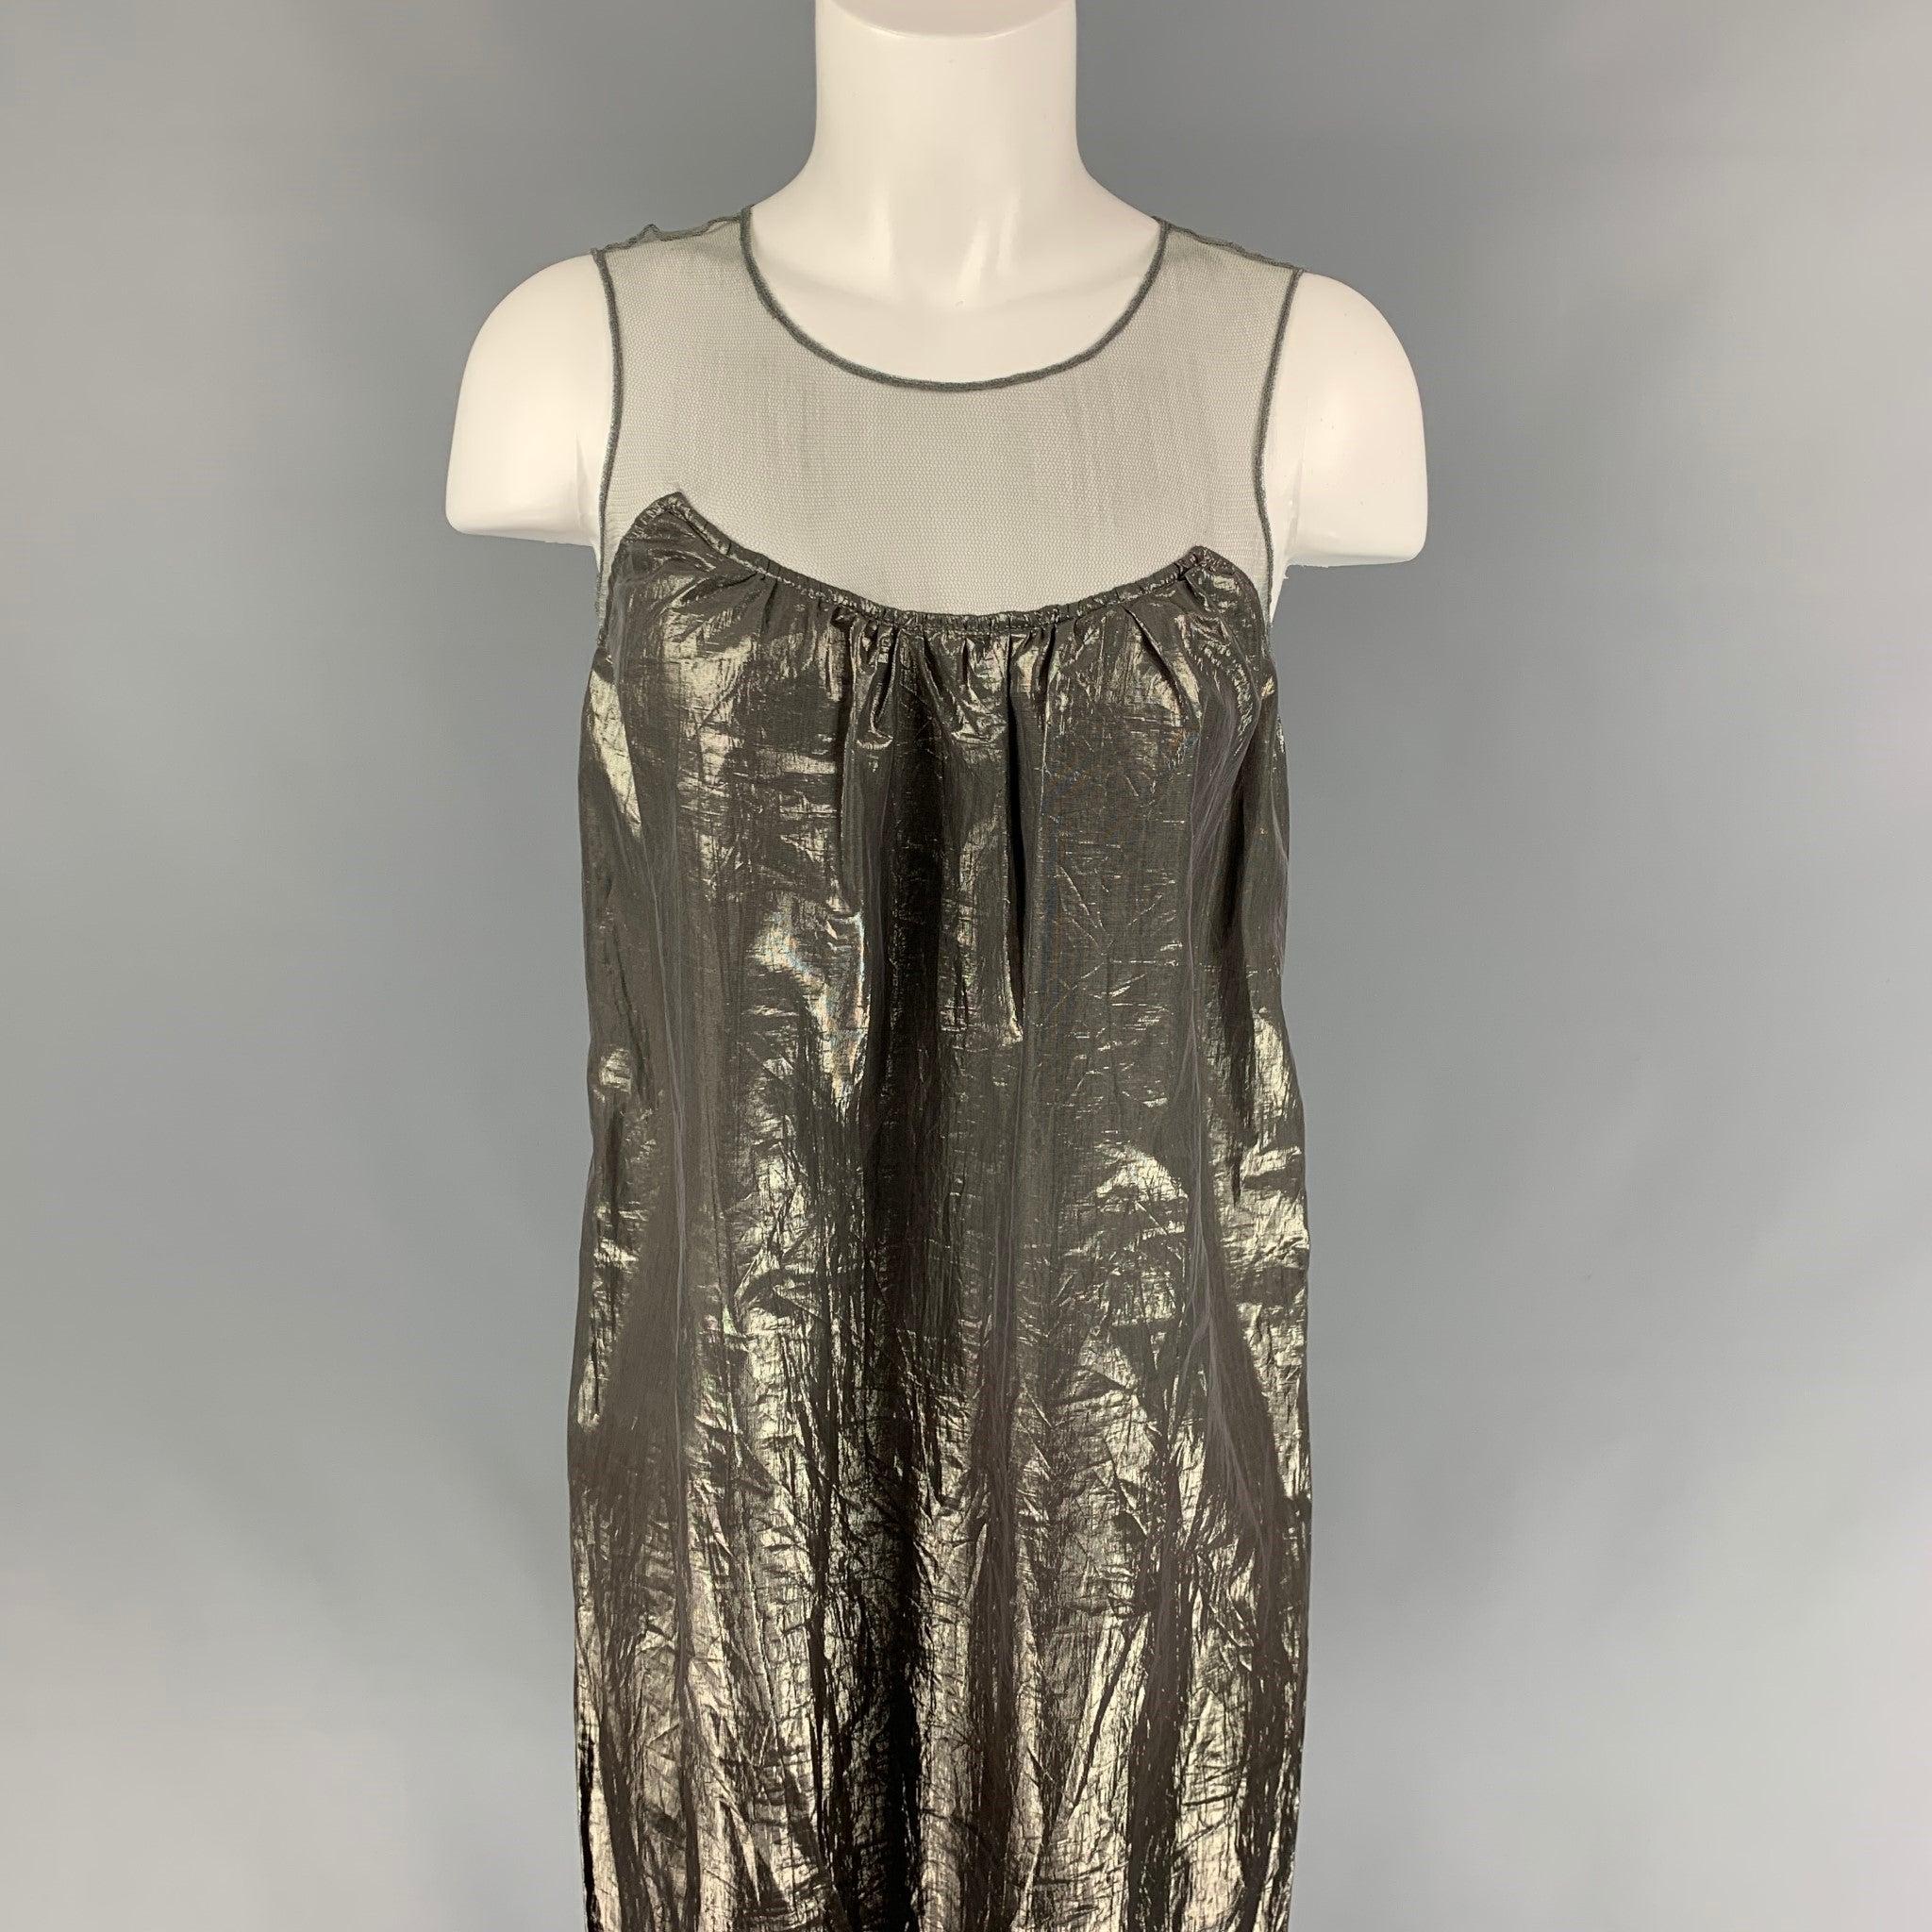 BURBERRY PRORSUM dress comes in a gunmetal silk blend featuring a shift style, mesh panel, single button detail, and a back zip up closure. Made in Italy.
Very Good
Pre-Owned Condition. 

Marked:   40 

Measurements: 
 
Shoulder: 12.5 inches  Bust: